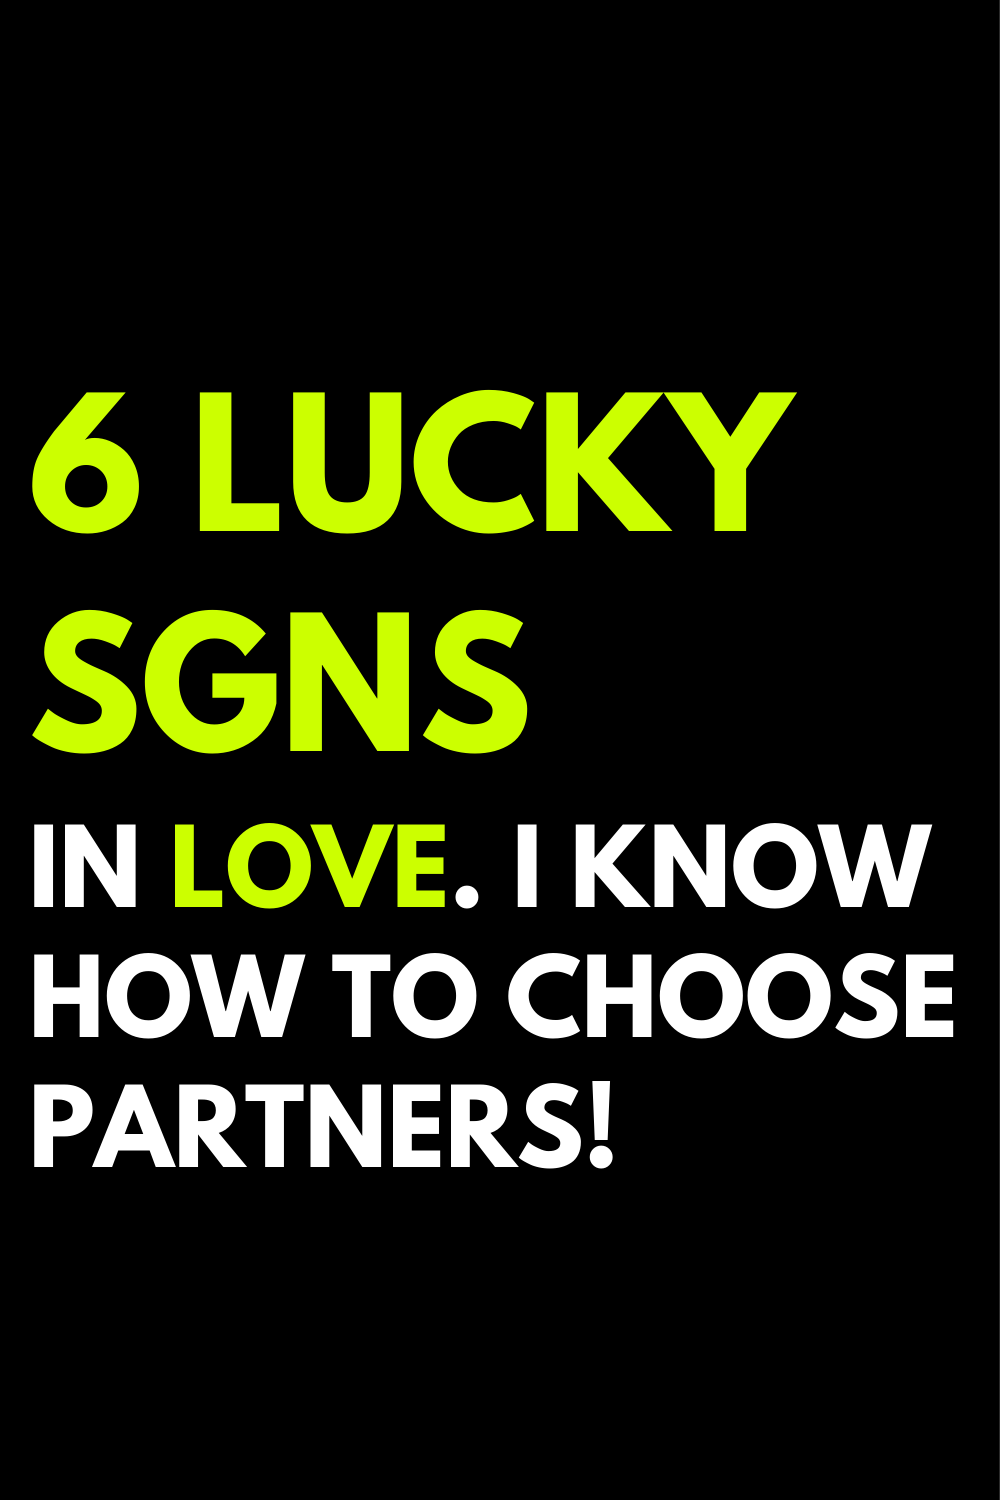 6 lucky signs in love. I know how to choose partners!